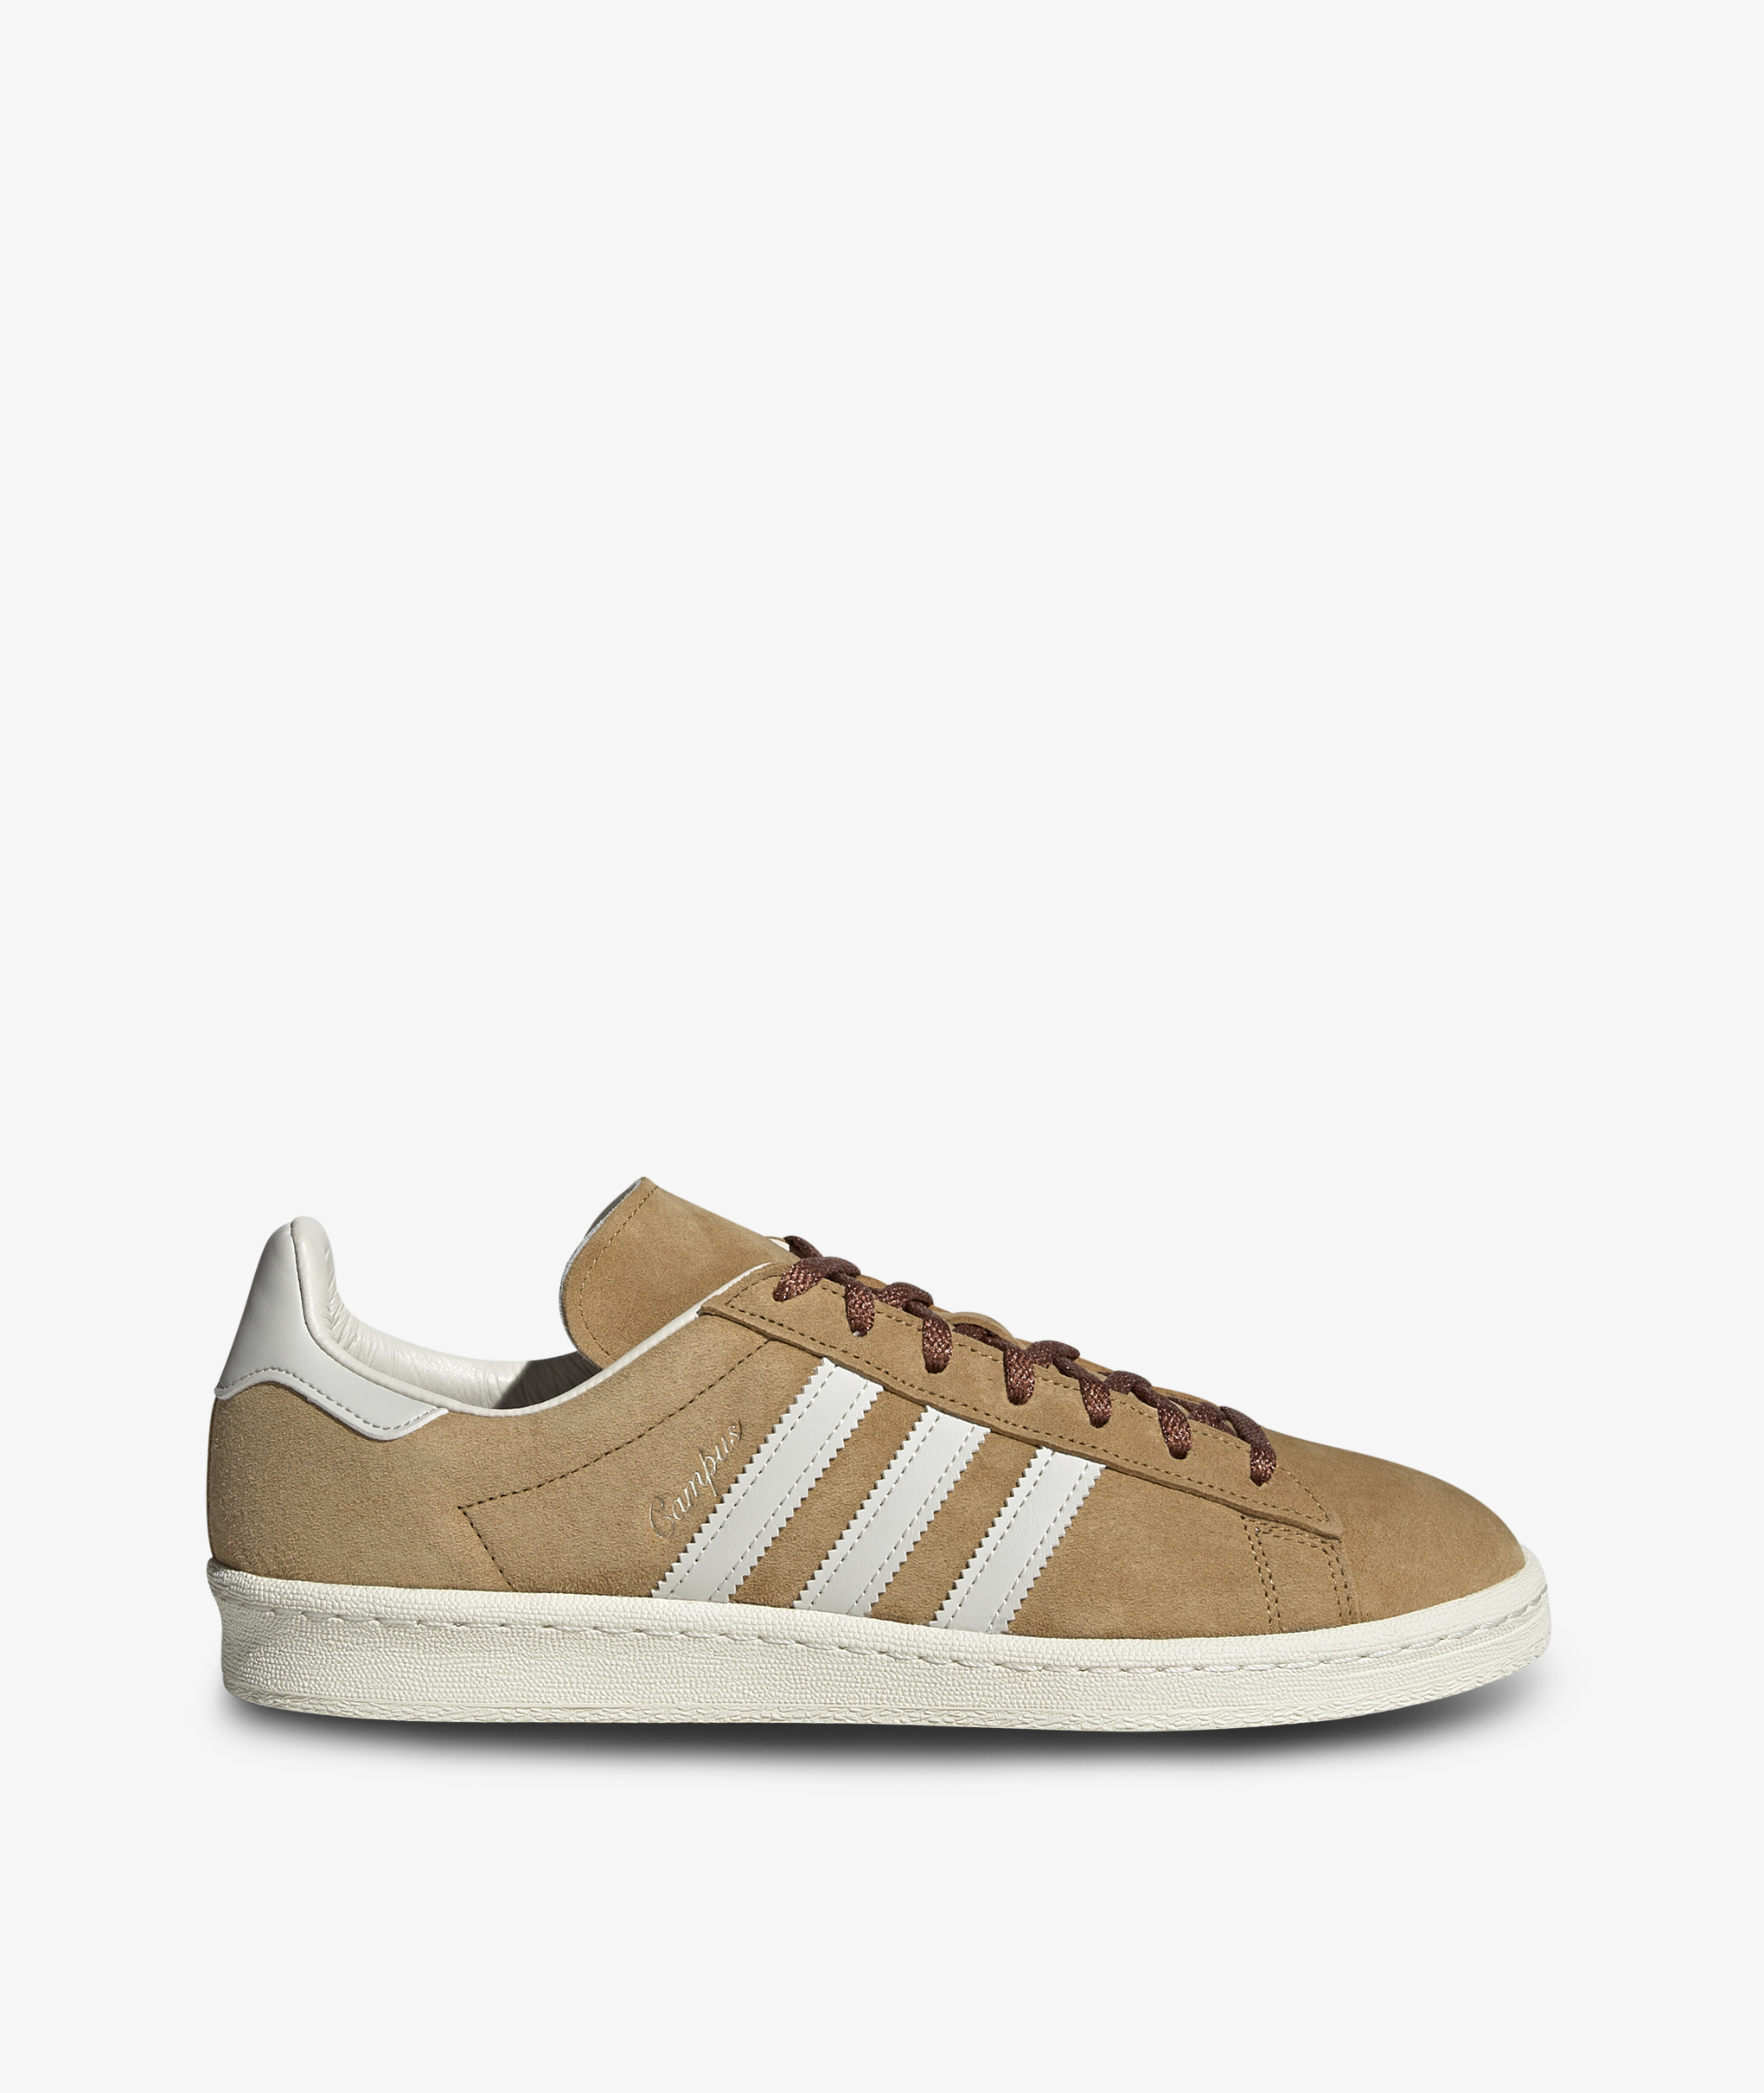 Norse Store | Shipping Worldwide - adidas Originals Campus 80's